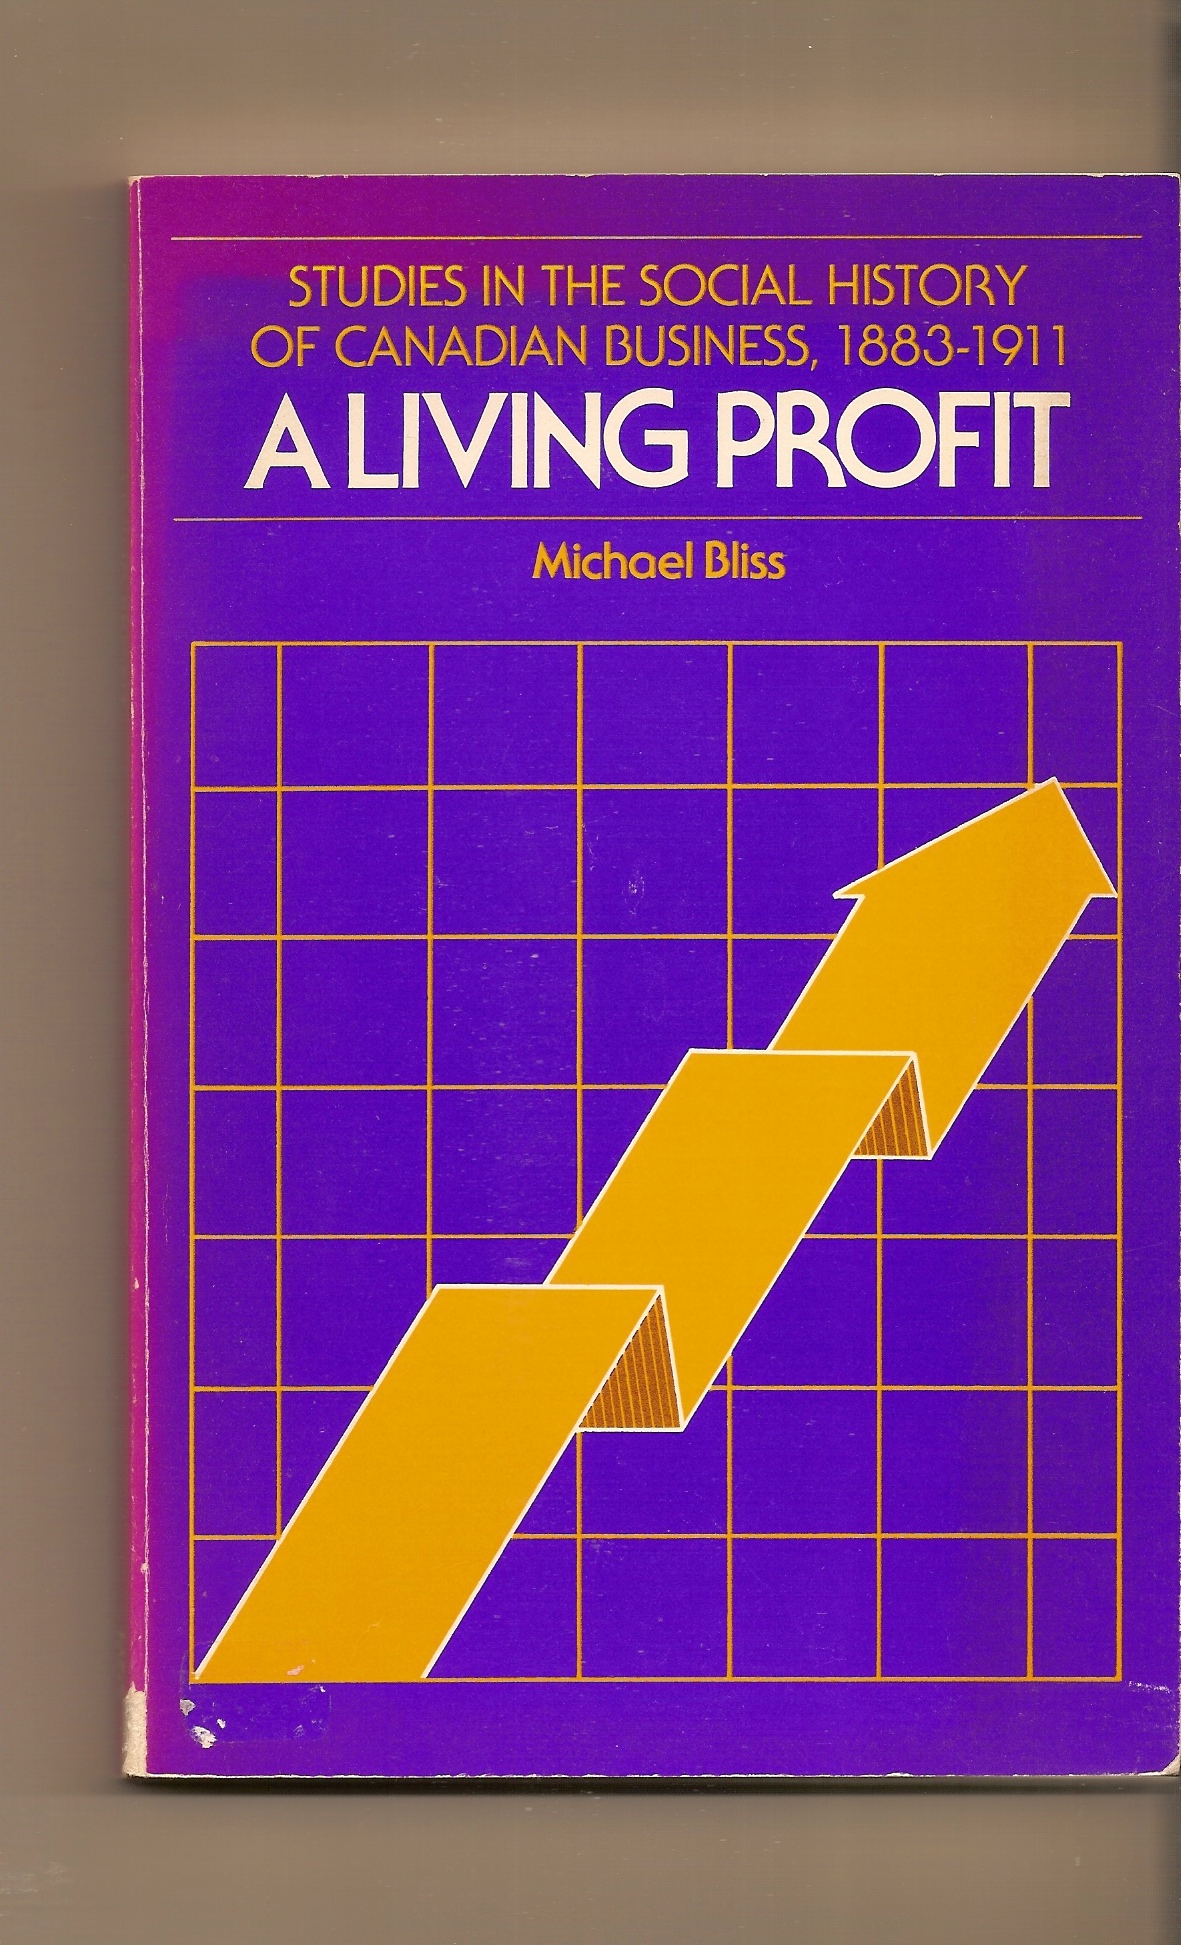 BLISS, MICHAEL - A Living Profit Studies in the Social History of Canadian Business, 1883-1911